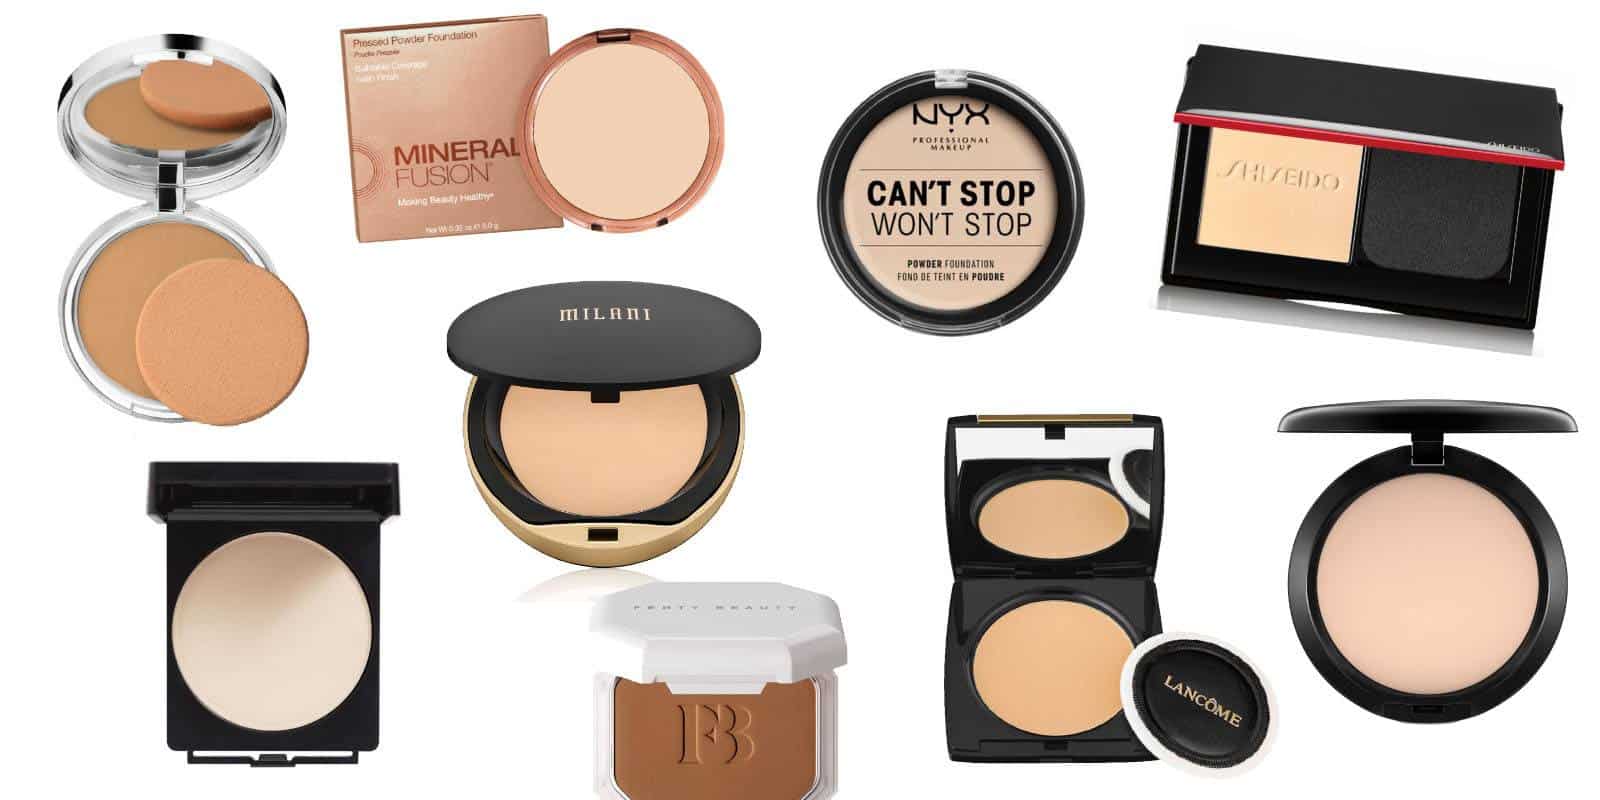 papir auktion pels The Best Powder Foundation for Oily Skin in 2023